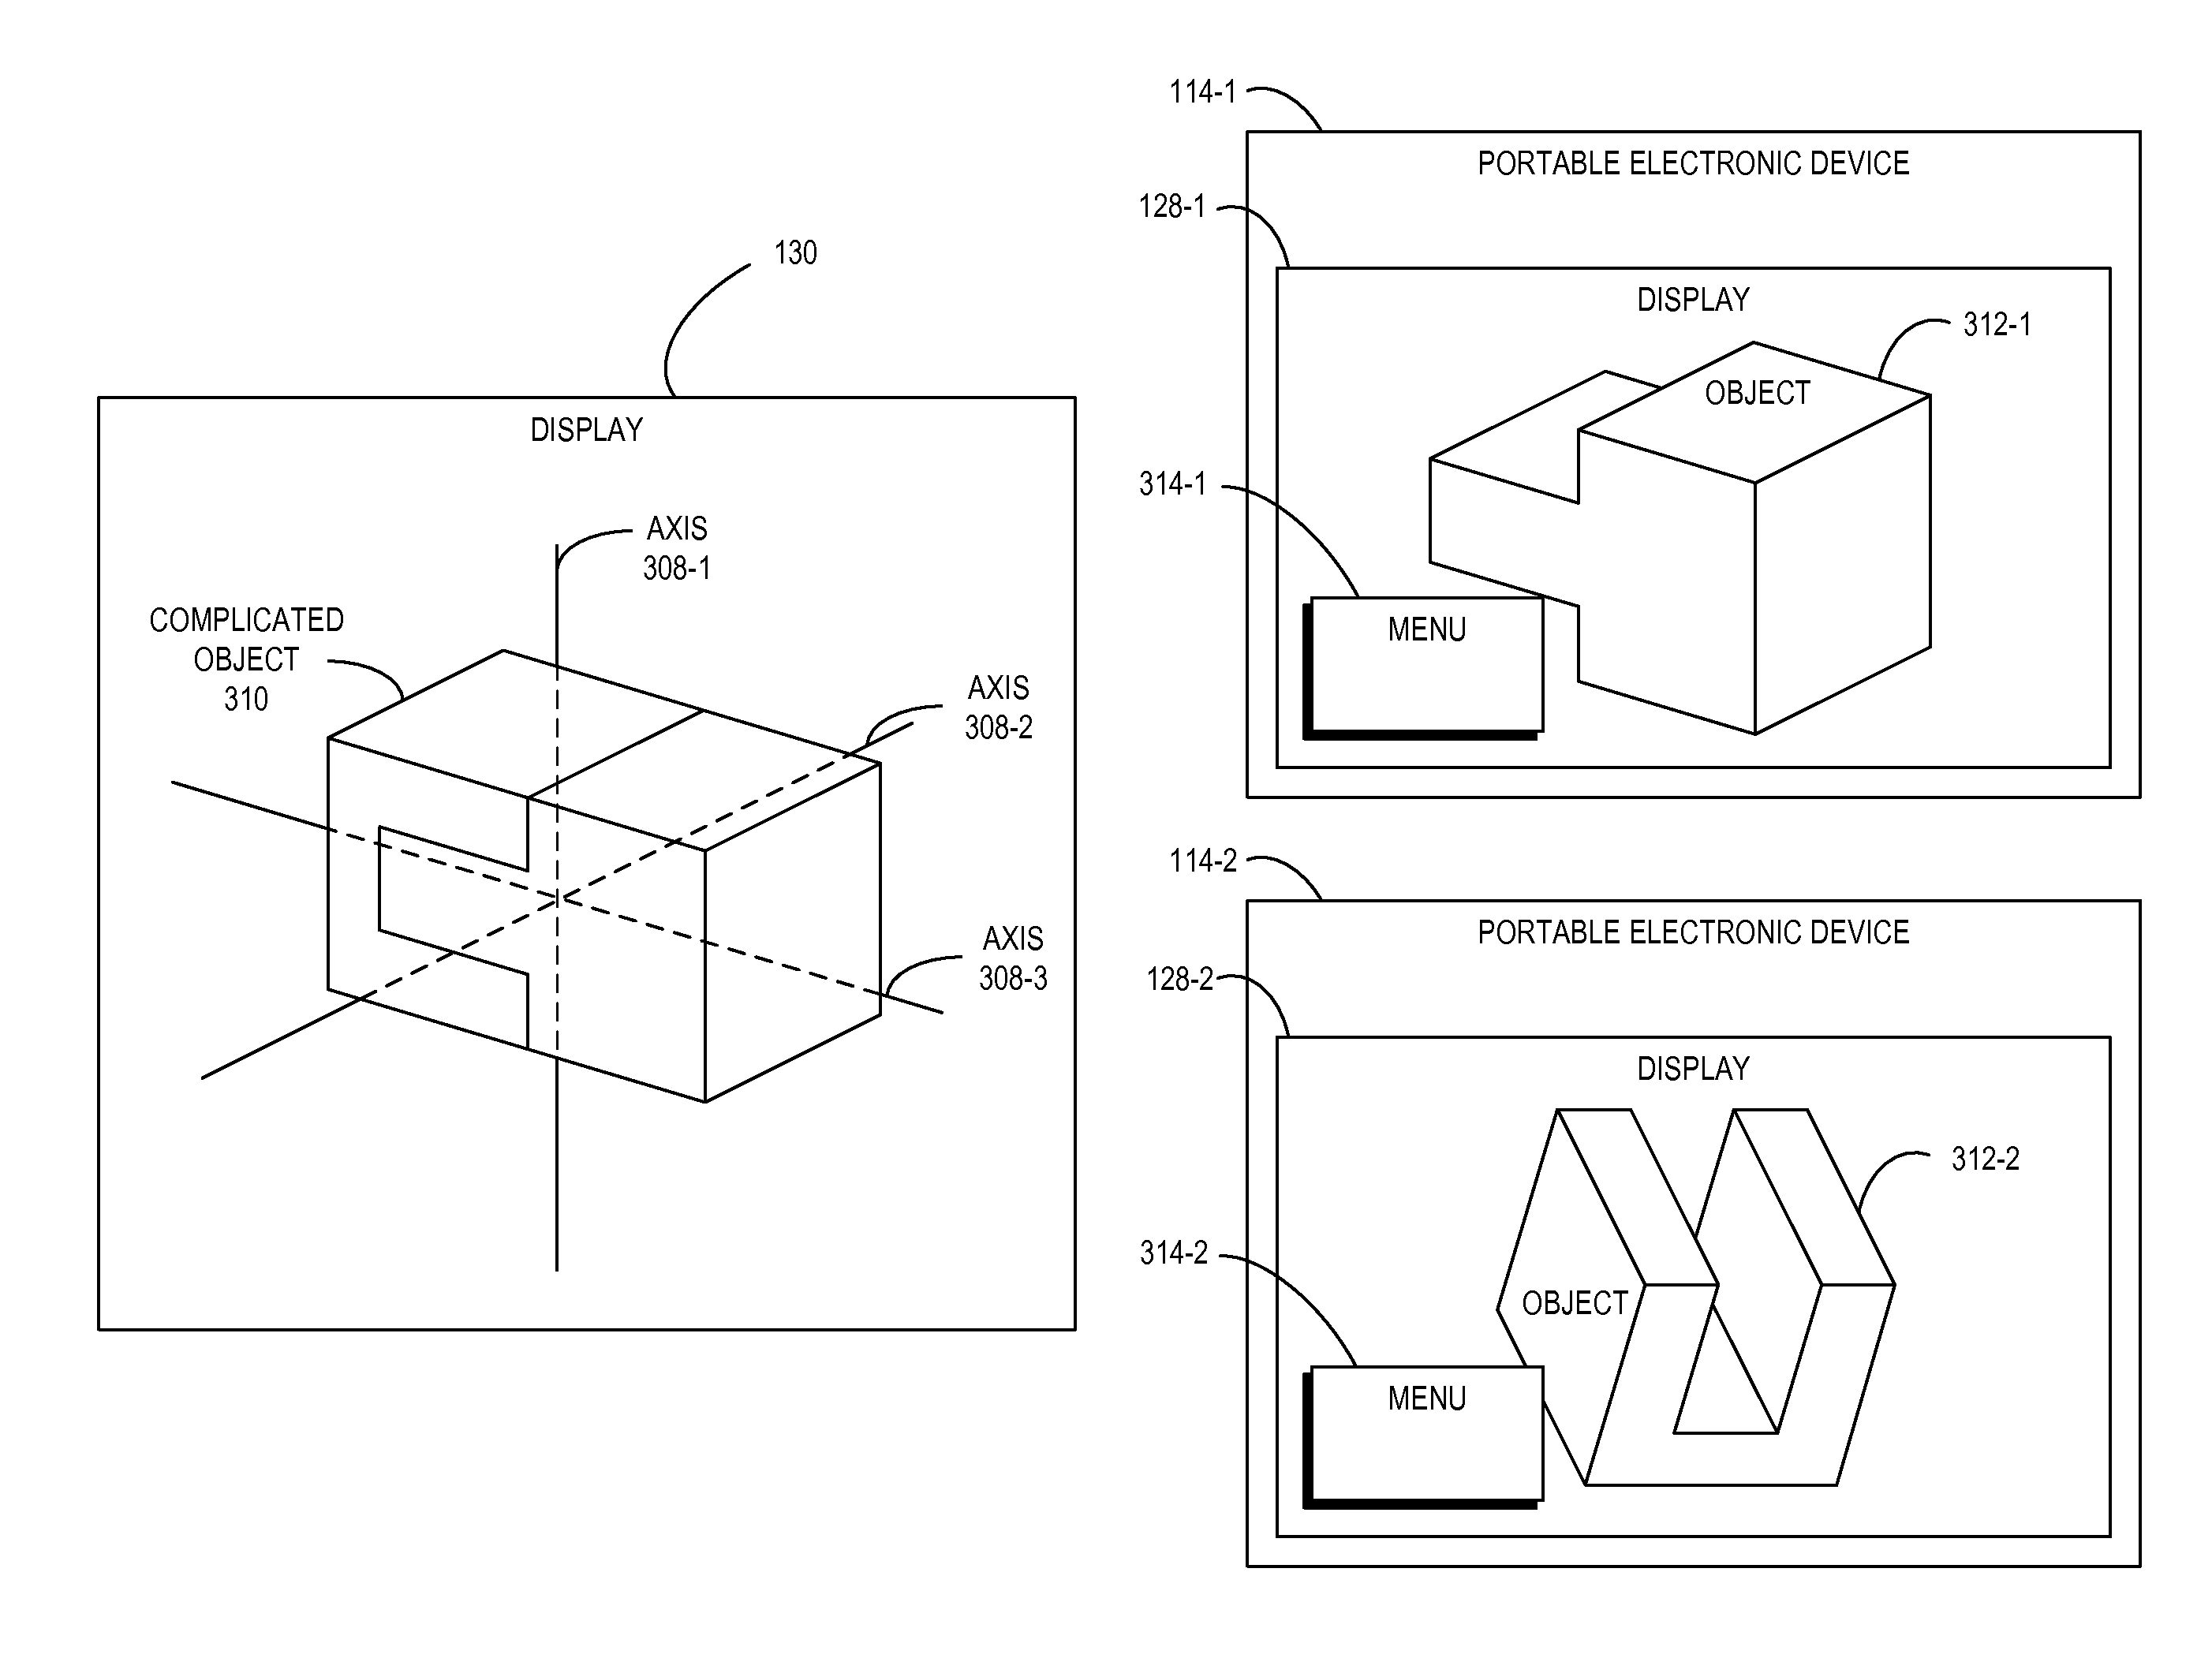 System for interacting with objects in a virtual environment